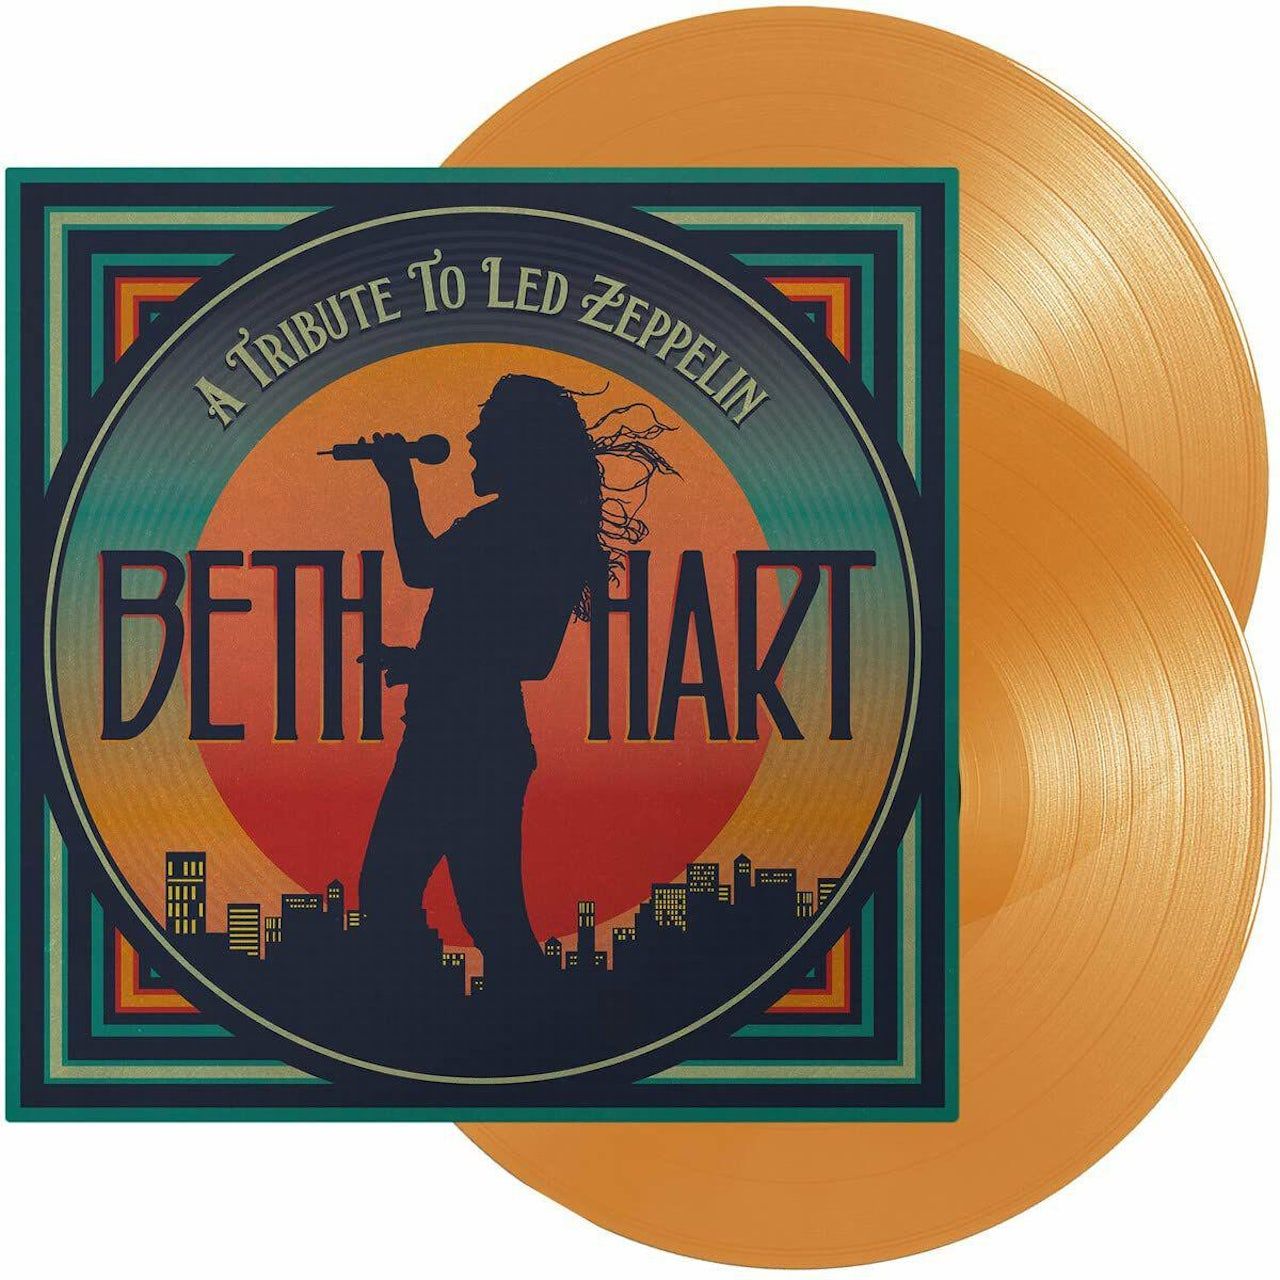 Виниловая пластинка Hart, Beth, A Tribute To Led Zeppelin (coloured) (0810020506044) виниловая пластинка hart beth a tribute to led zeppelin limited edition